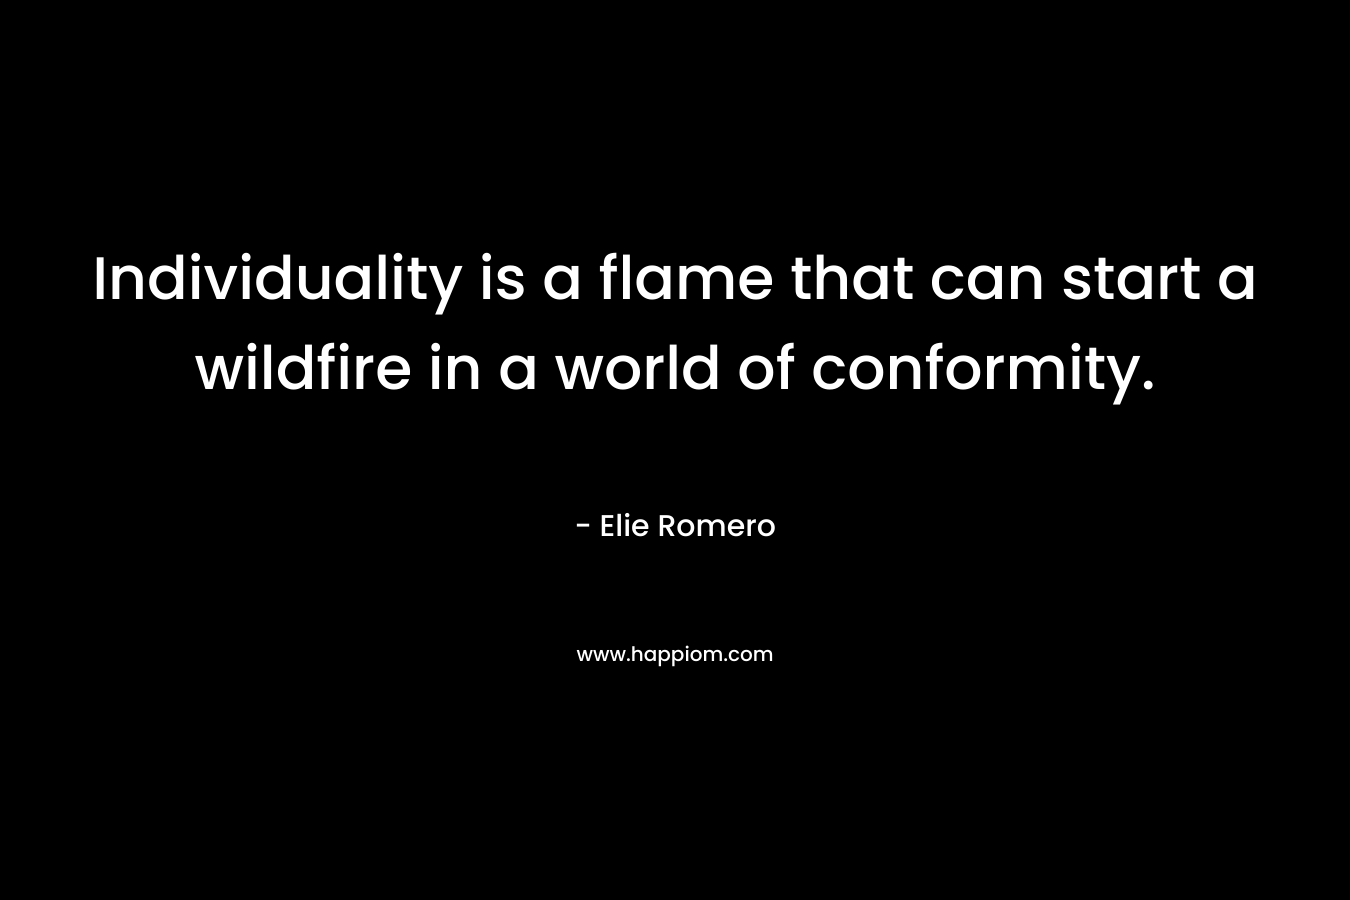 Individuality is a flame that can start a wildfire in a world of conformity. – Elie Romero